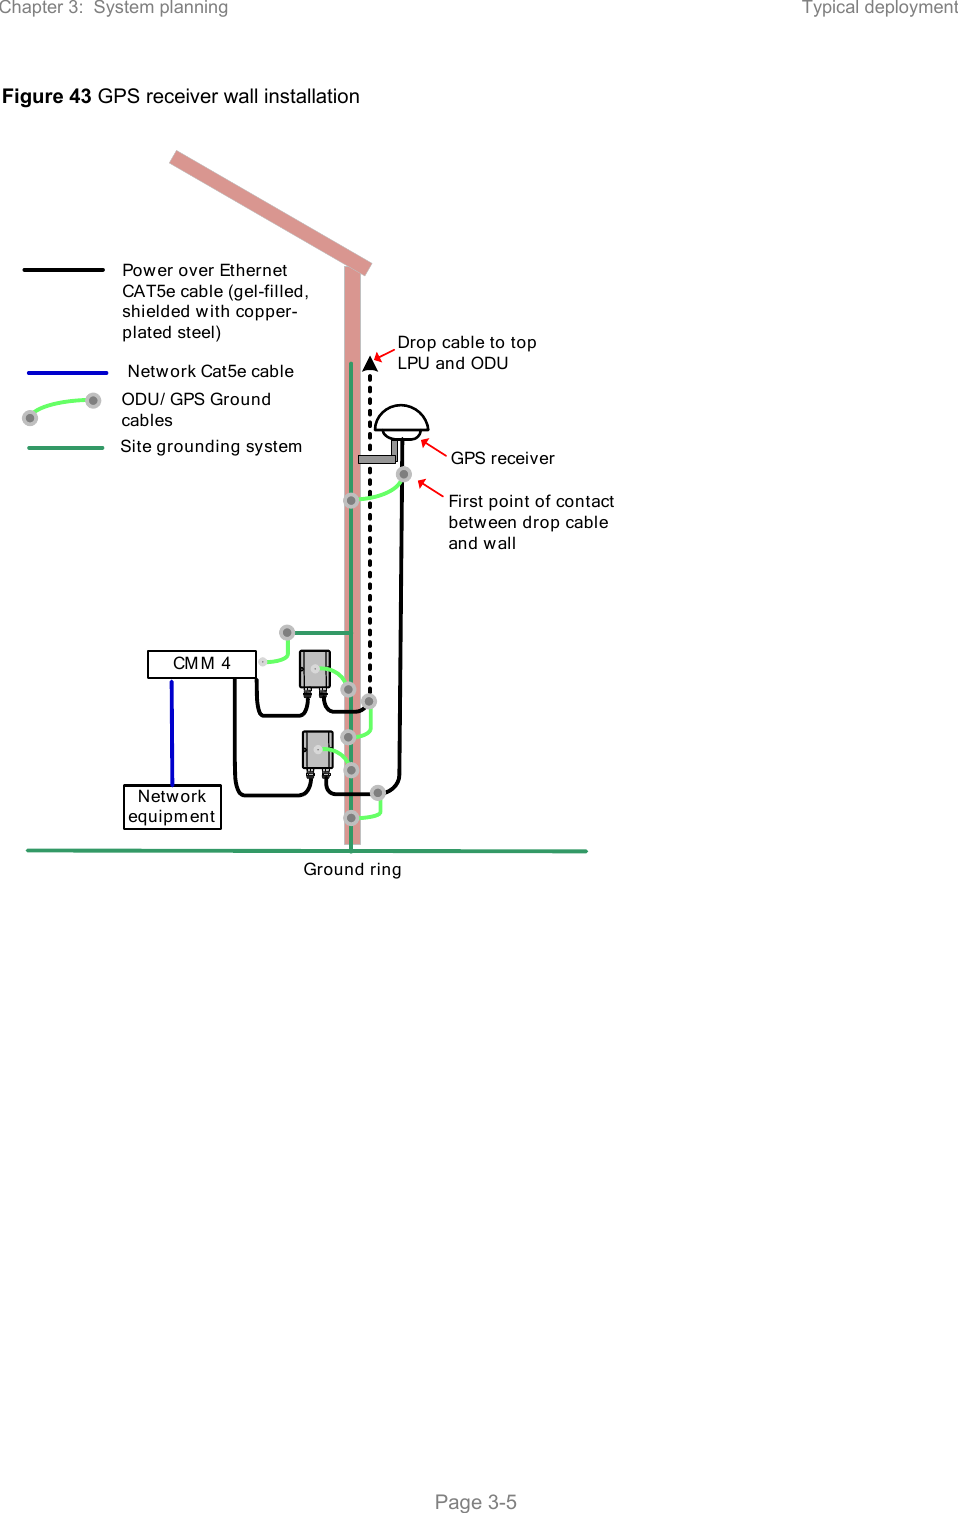 Chapter 3:  System planning  Typical deployment   Page 3-5 Figure 43 GPS receiver wall installation  NetworkequipmentODU/ GPS Ground cablesSite grounding systemDrop cable to top LPU and ODUGround ringPow er over Ethernet CAT5e cable (gel-filled, shielded with copper-plated steel)Netw ork Cat5e cableCM M  4GPS receiverFirst point of contact between drop cable and wall     